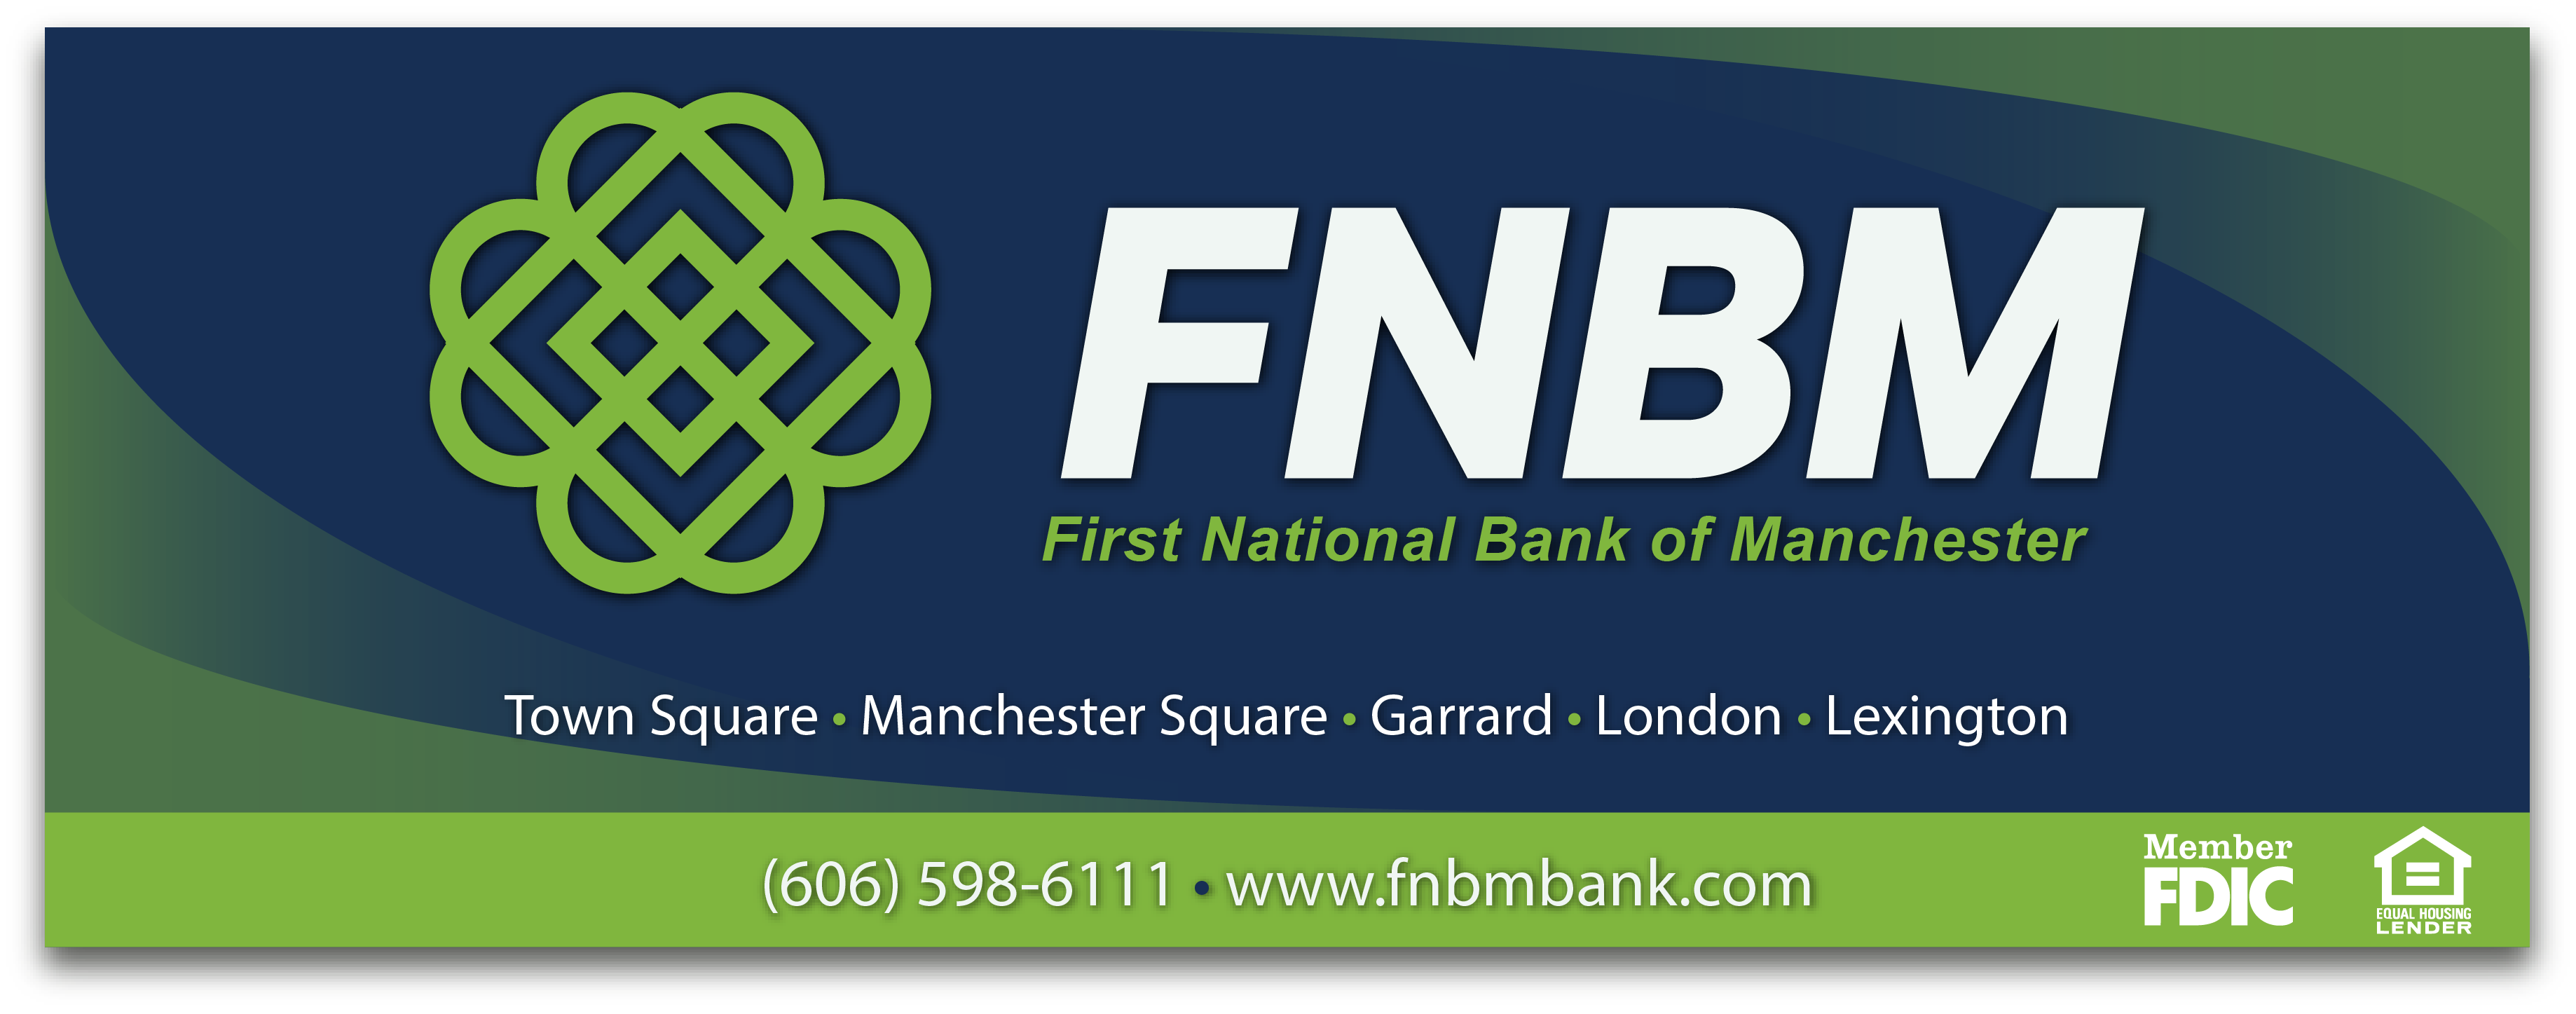 First National Bank of Manchester